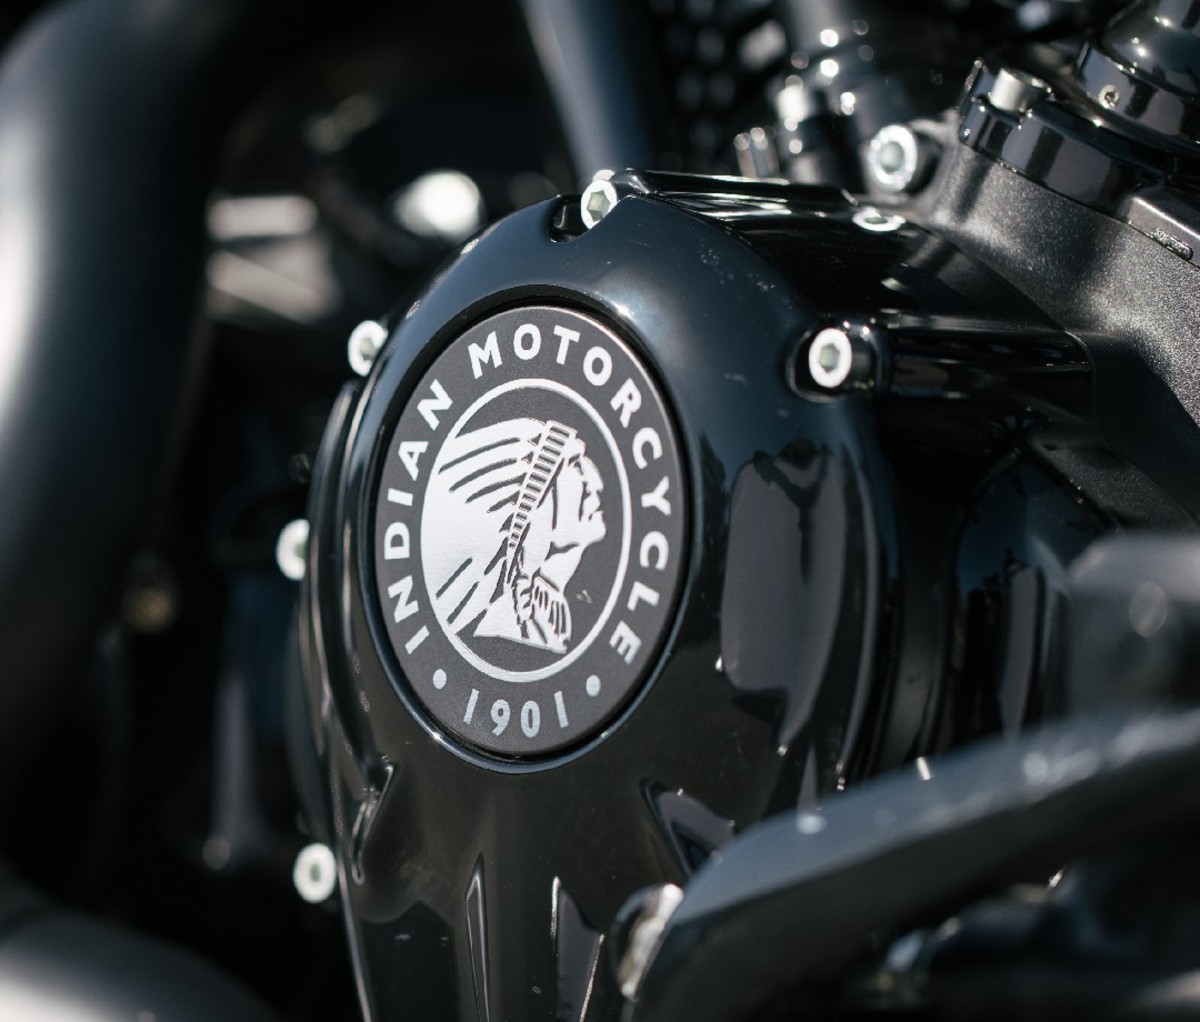 Closeup of Indian Motorcycles logo on side of motorcycle